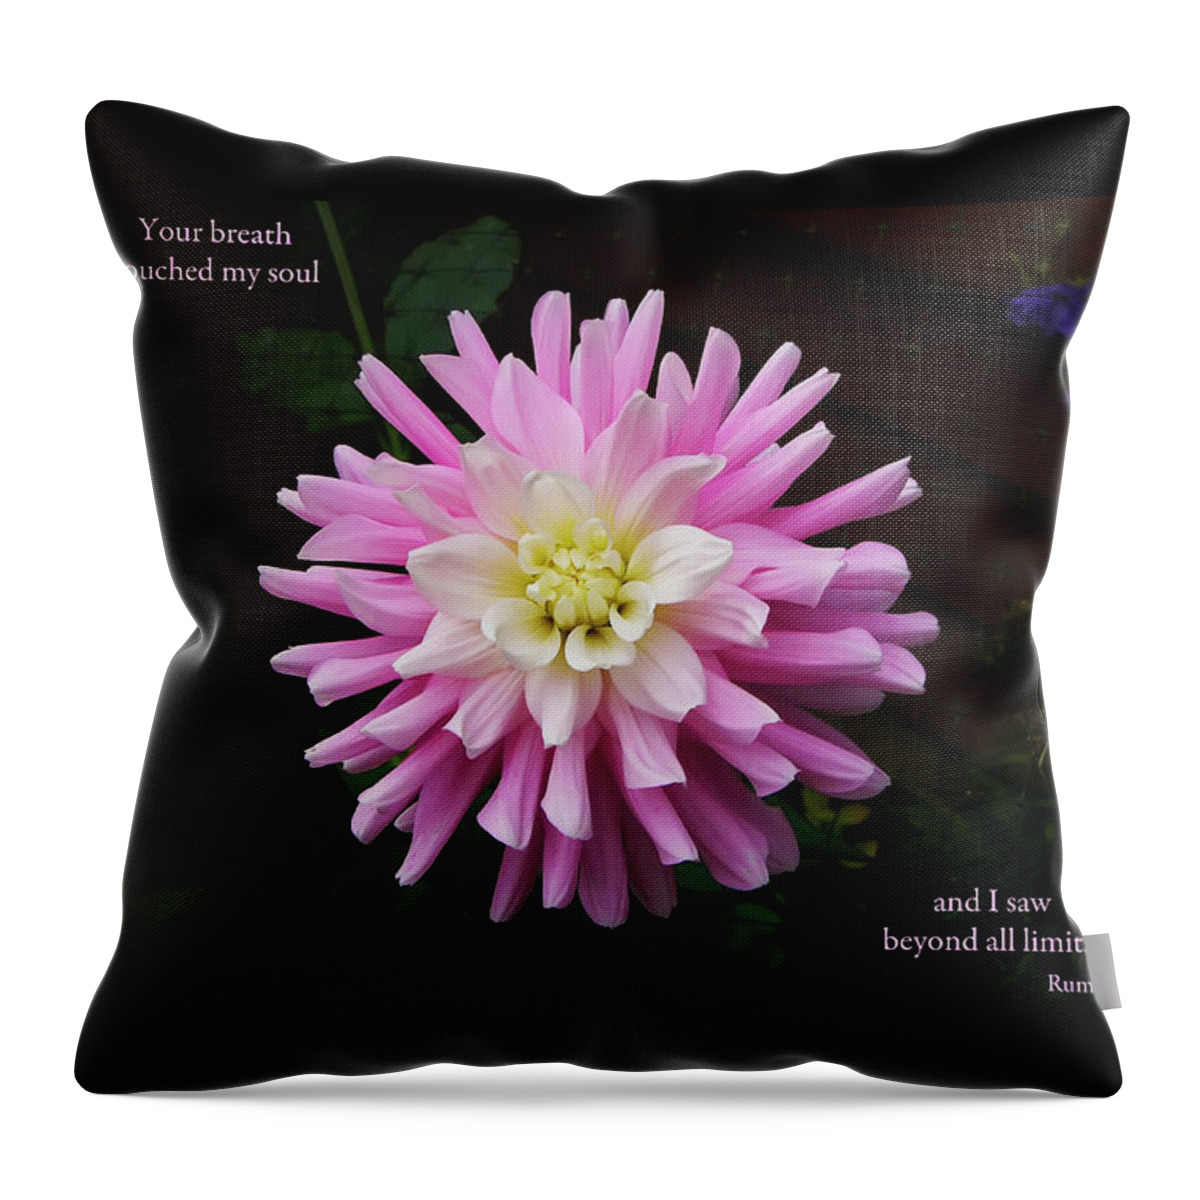 Photograph Throw Pillow featuring the photograph Your Breath Touched my Soul by Rhonda McDougall